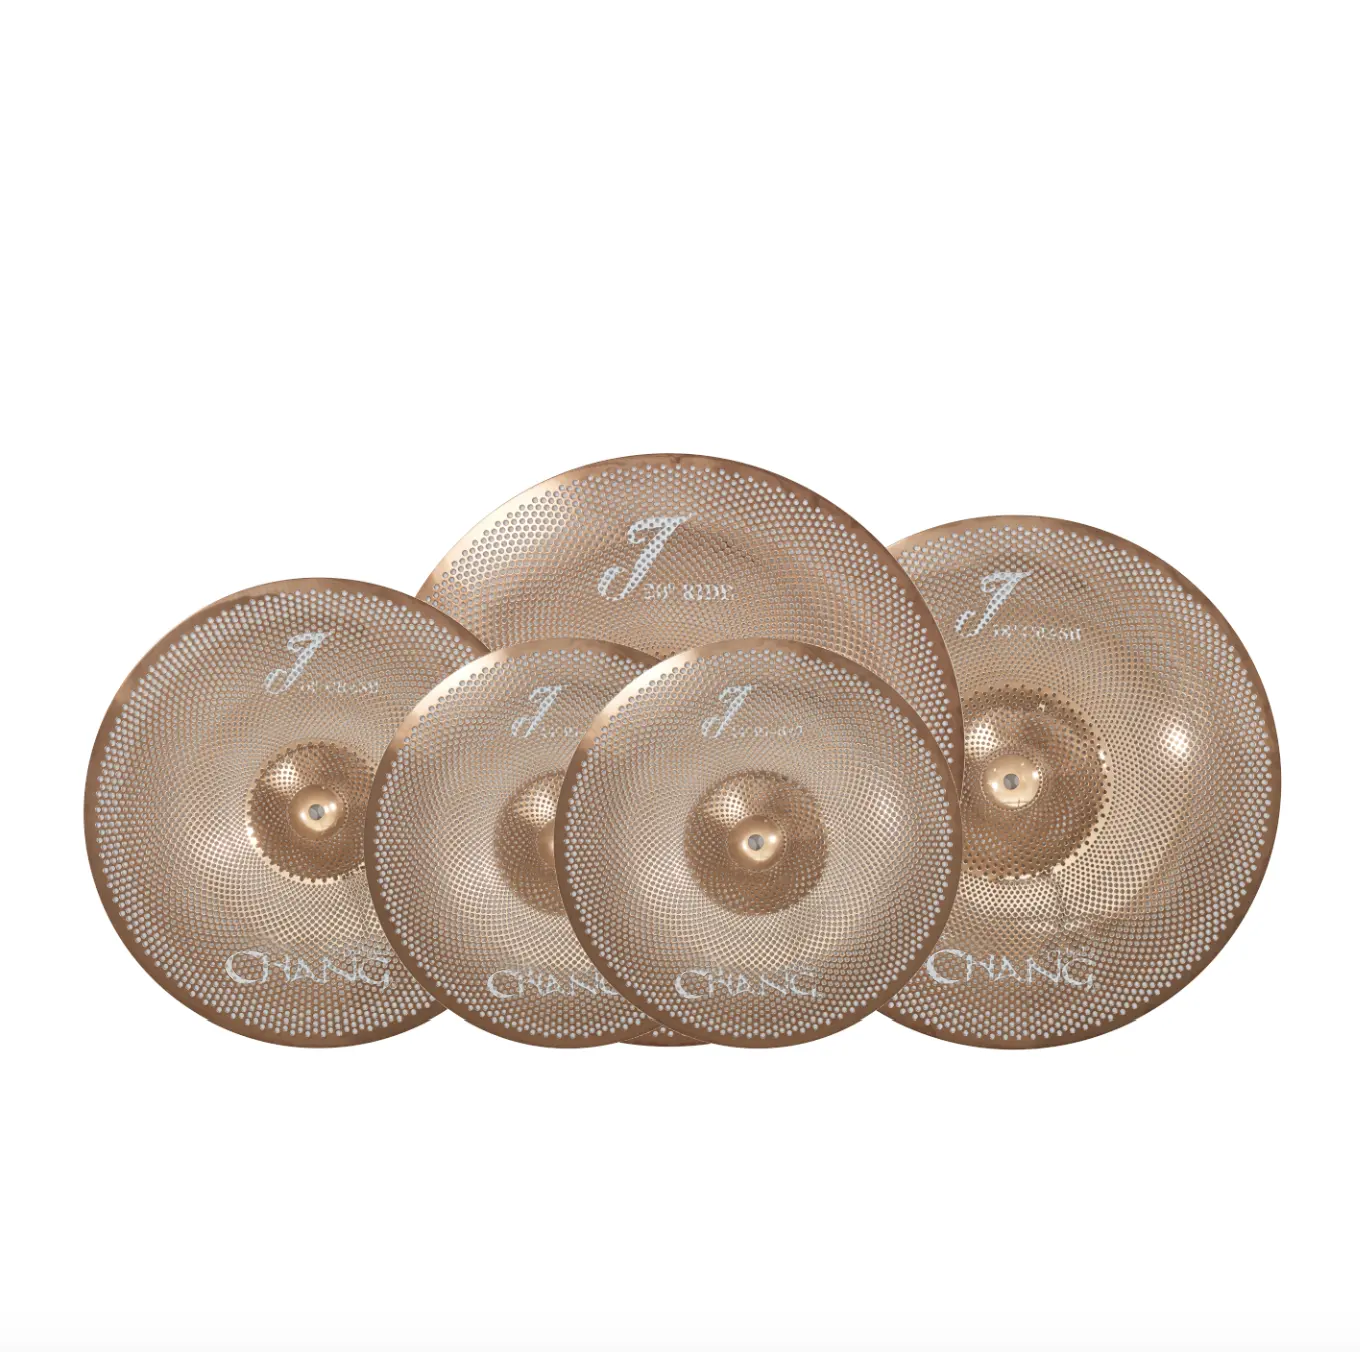 Chang J Series Low Volume Cymbals With Free Cymbal Bag